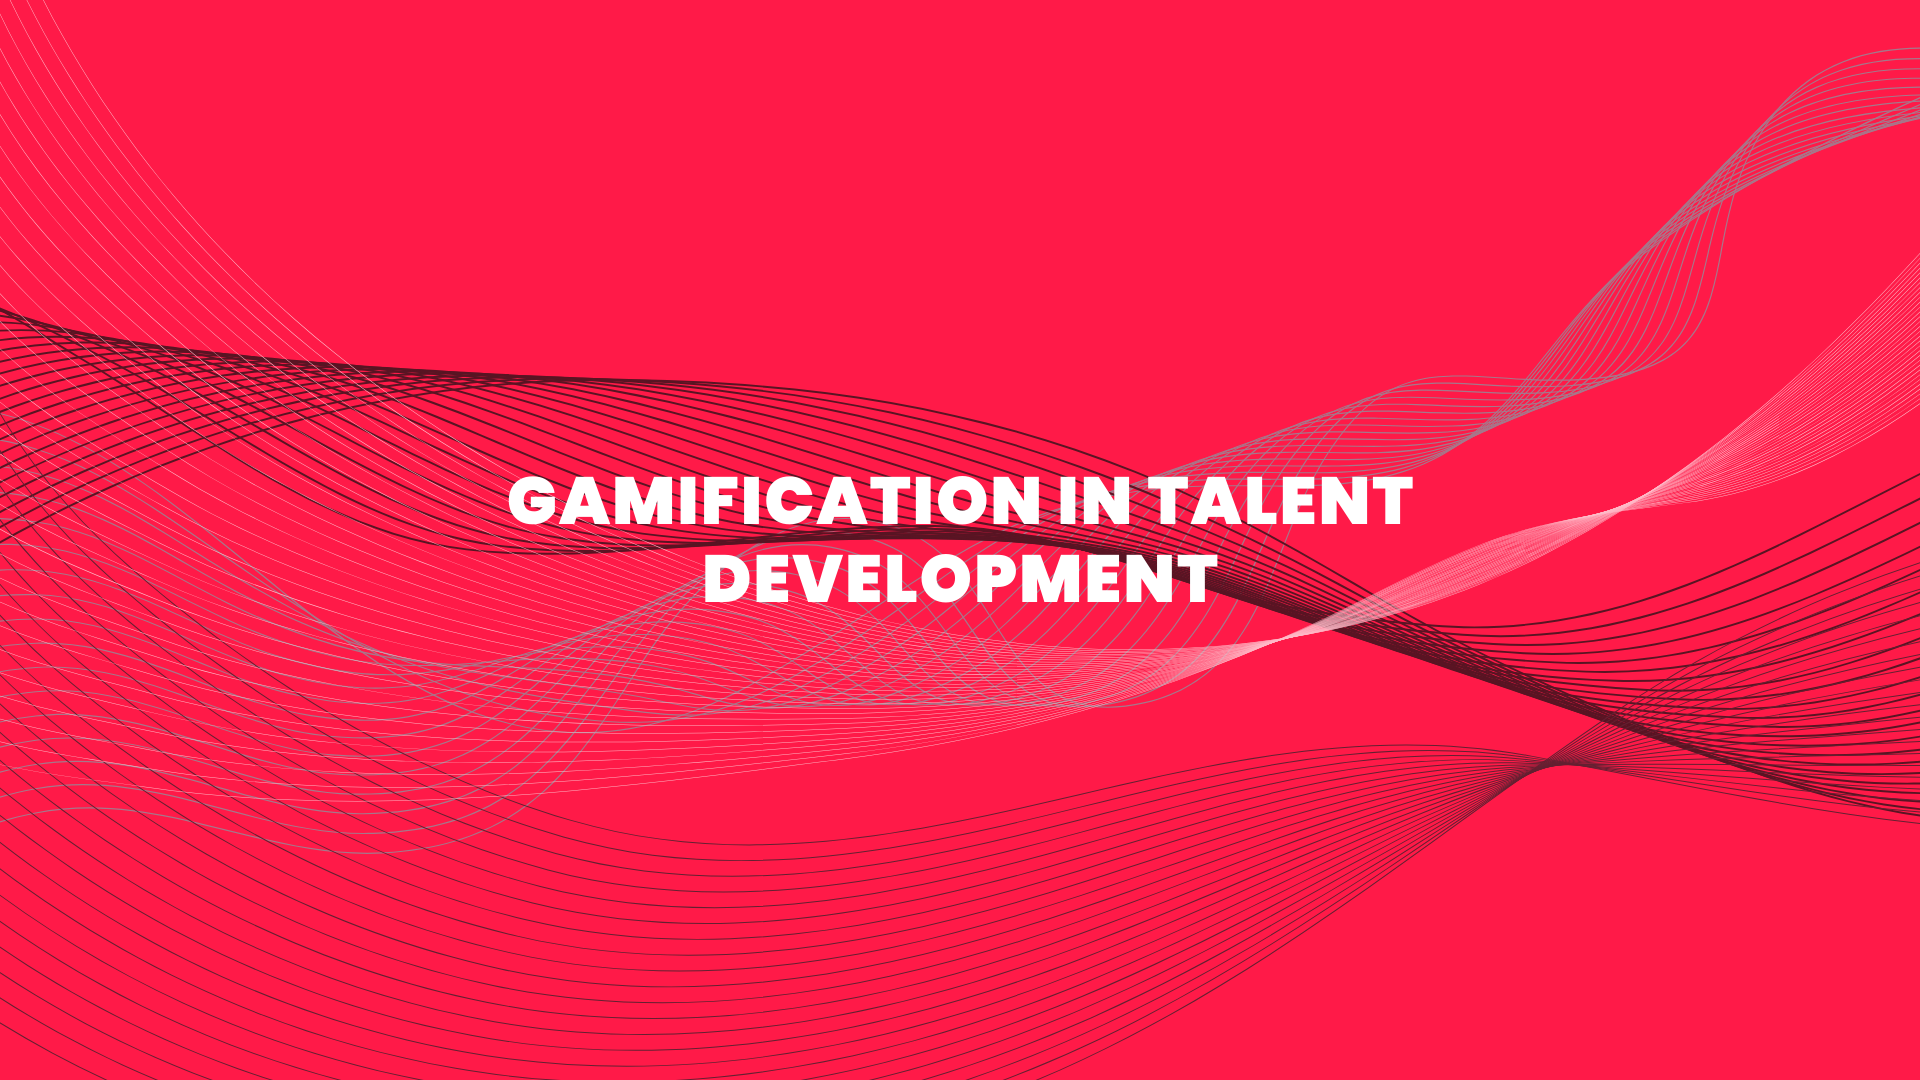 Gamification in Talent Development